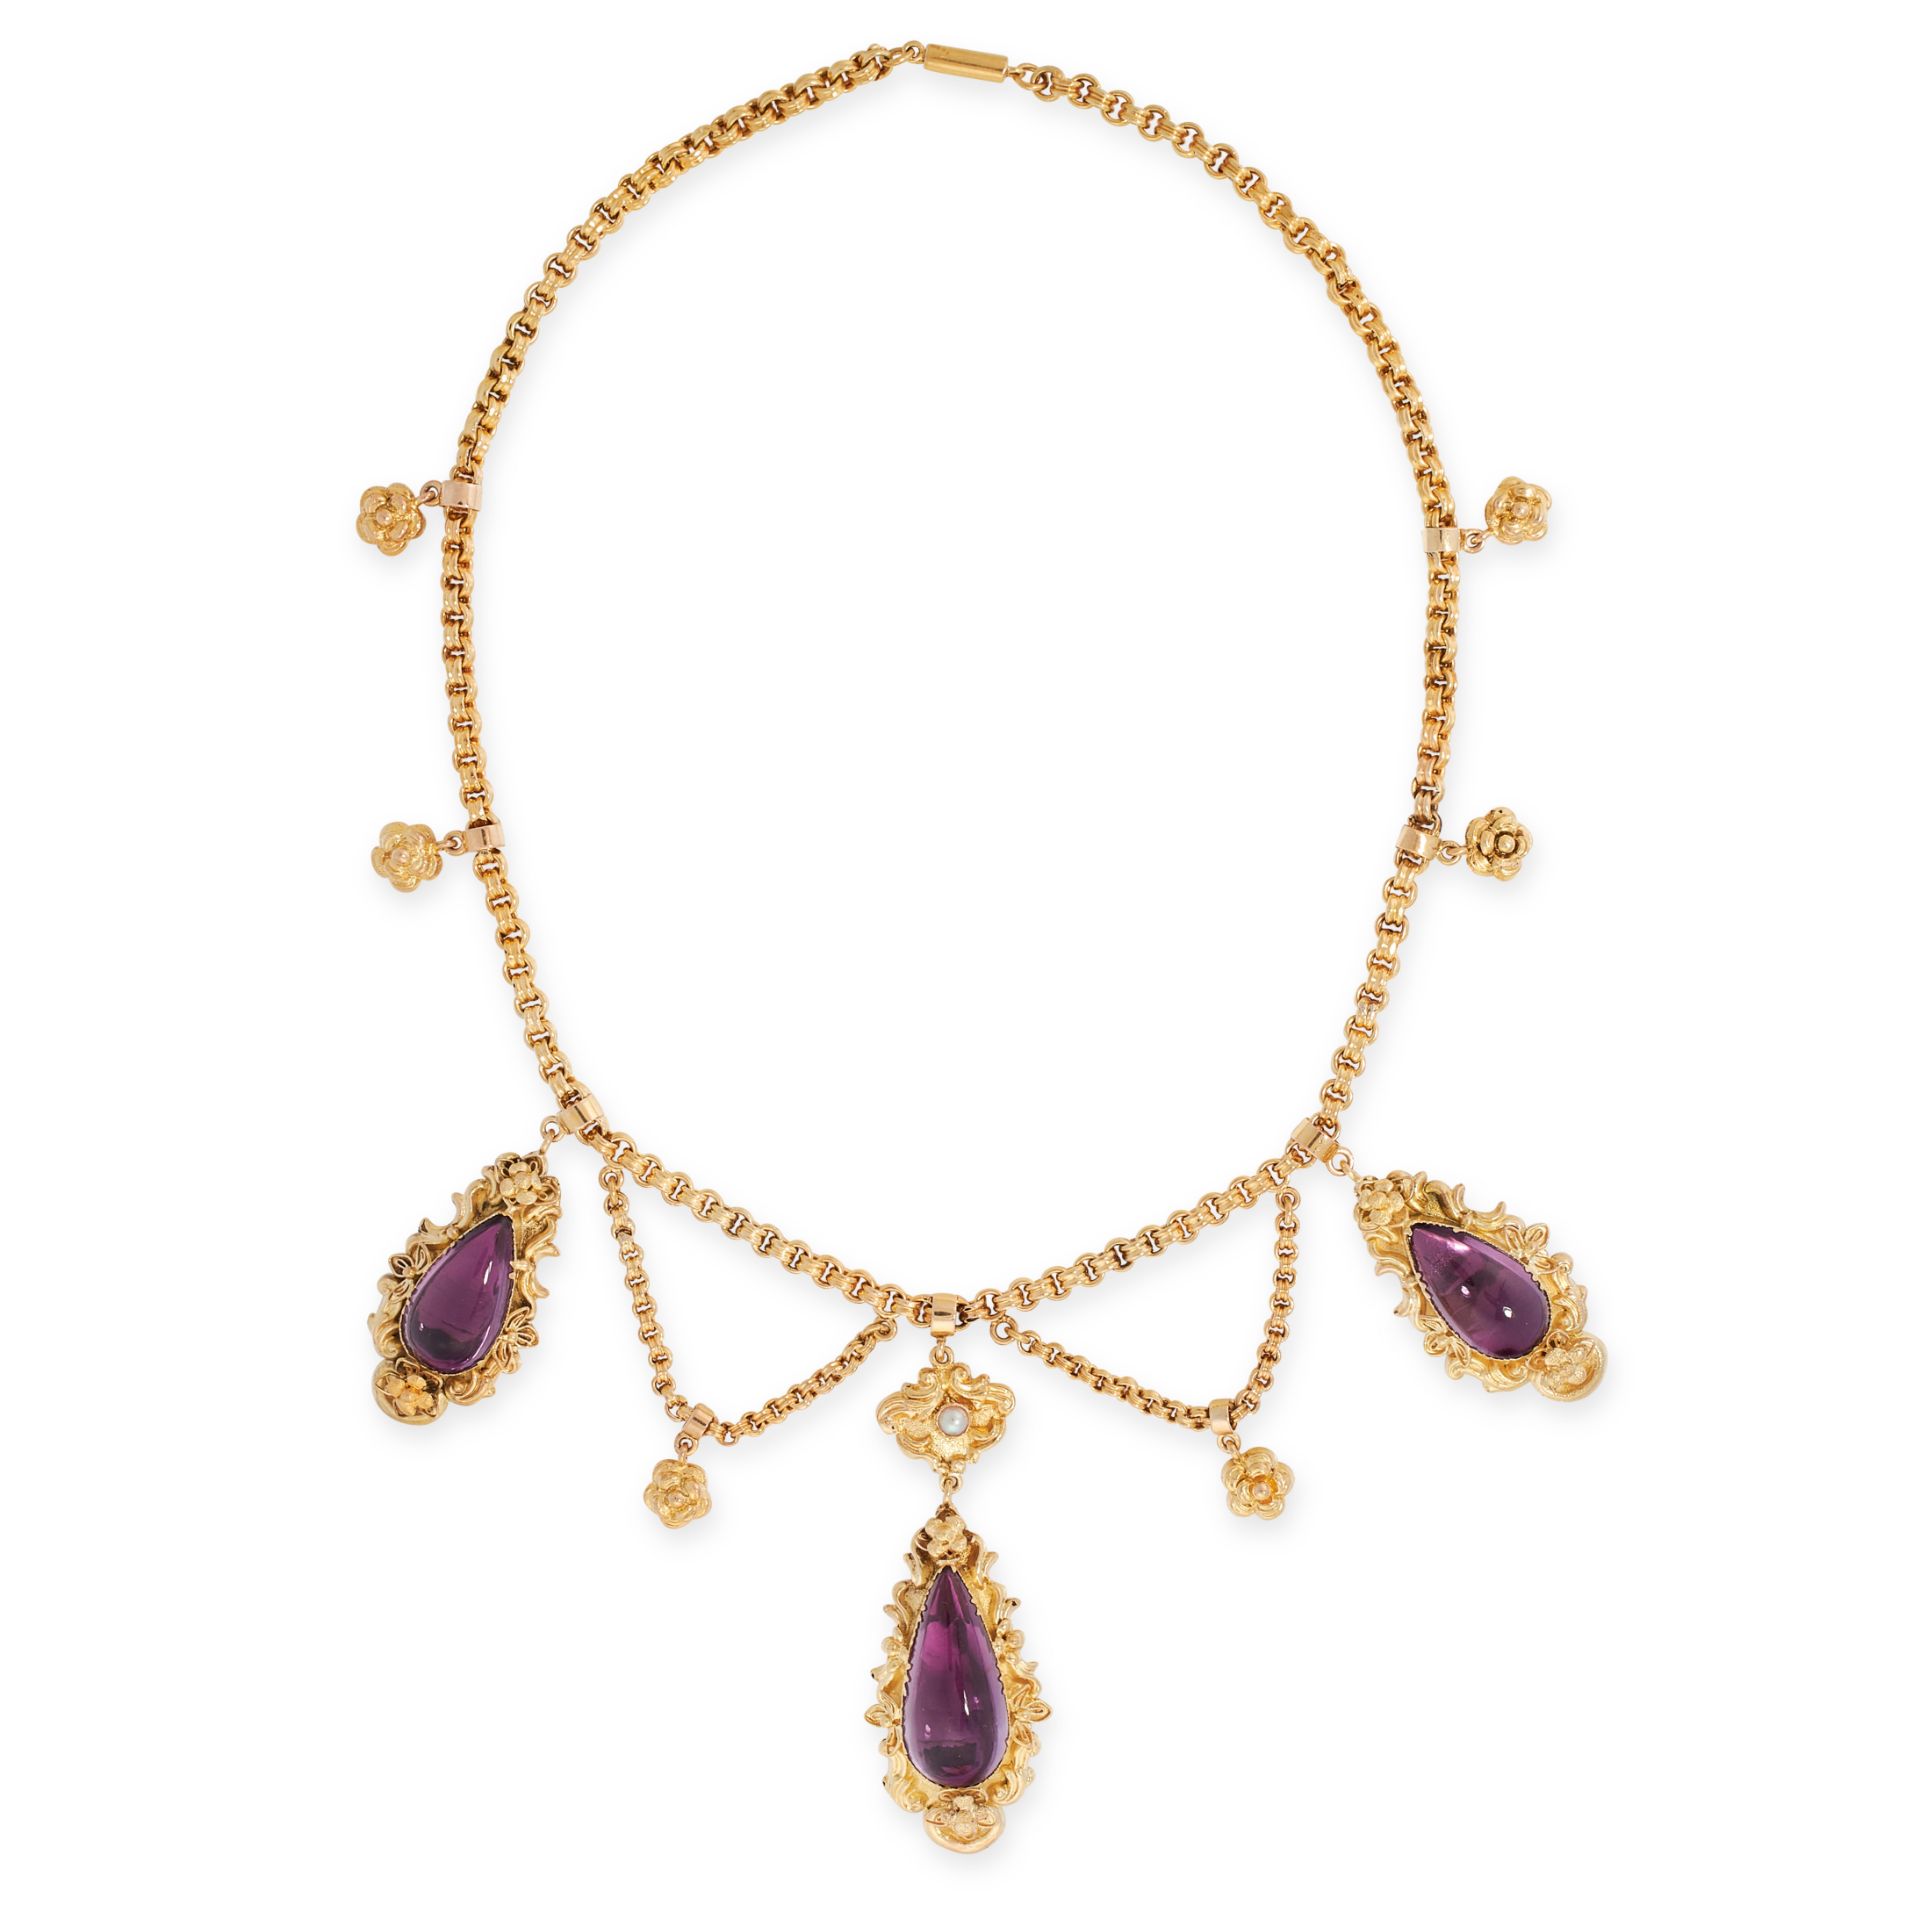 ANTIQUE AMETHYST AND PEARL NECKLACE, 19TH CENTURY in 15ct yellow gold, the fancy link necklace